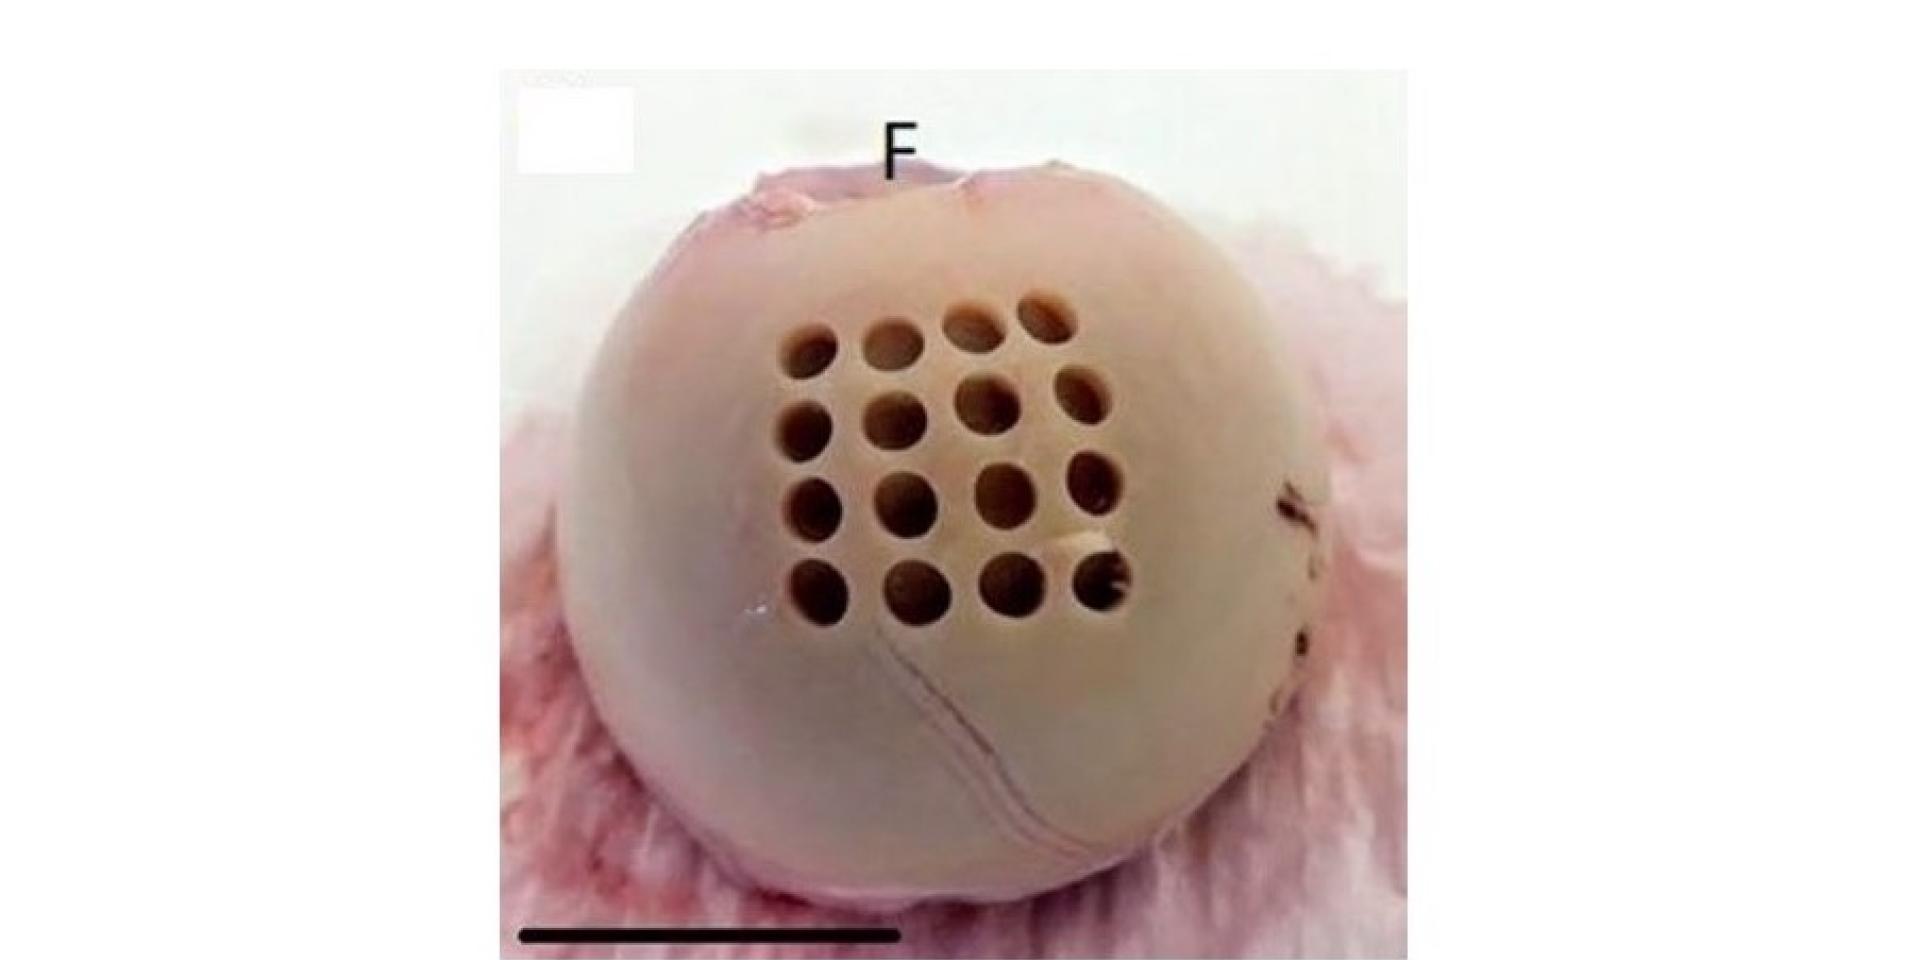 Figure 2. A human femoral head with small circular ‘wells’ prepared in the cartilage into which MSCs are placed and then stimulated to generate new cartilage. (F indicates the fovea and the source of the foveal ligament. Scale bar is 25mm).